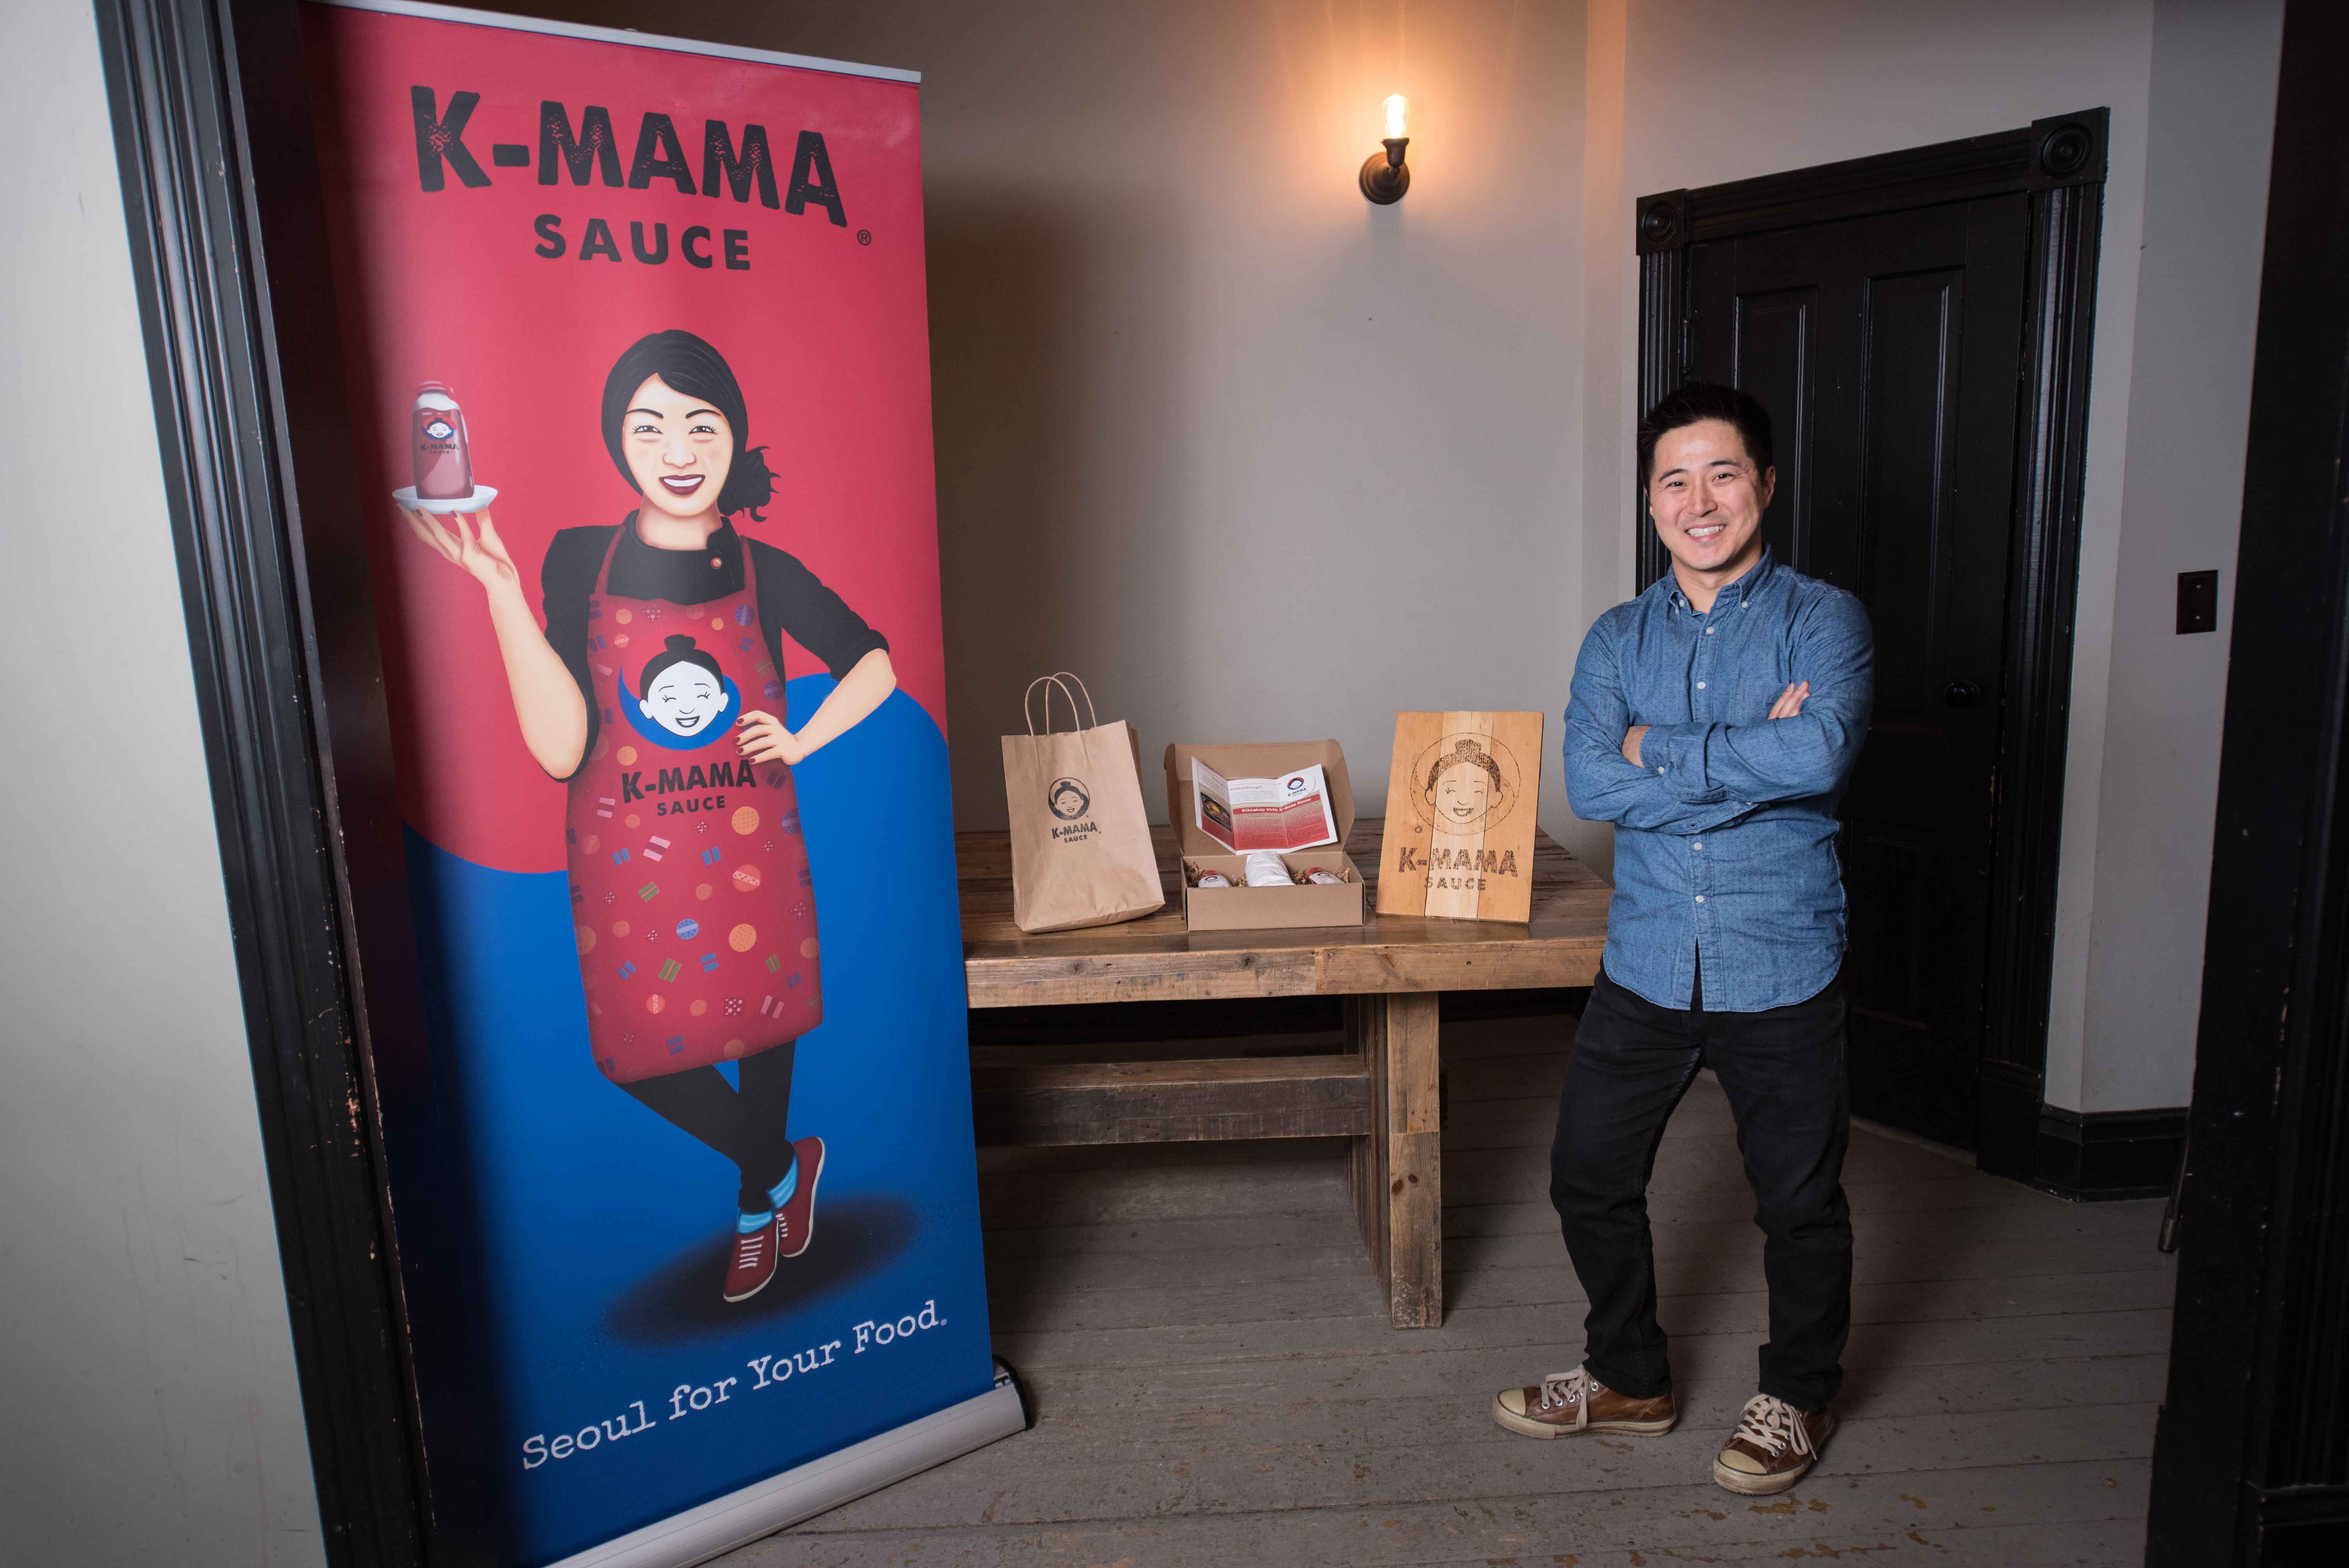 K-Mama sauce owner standing by product